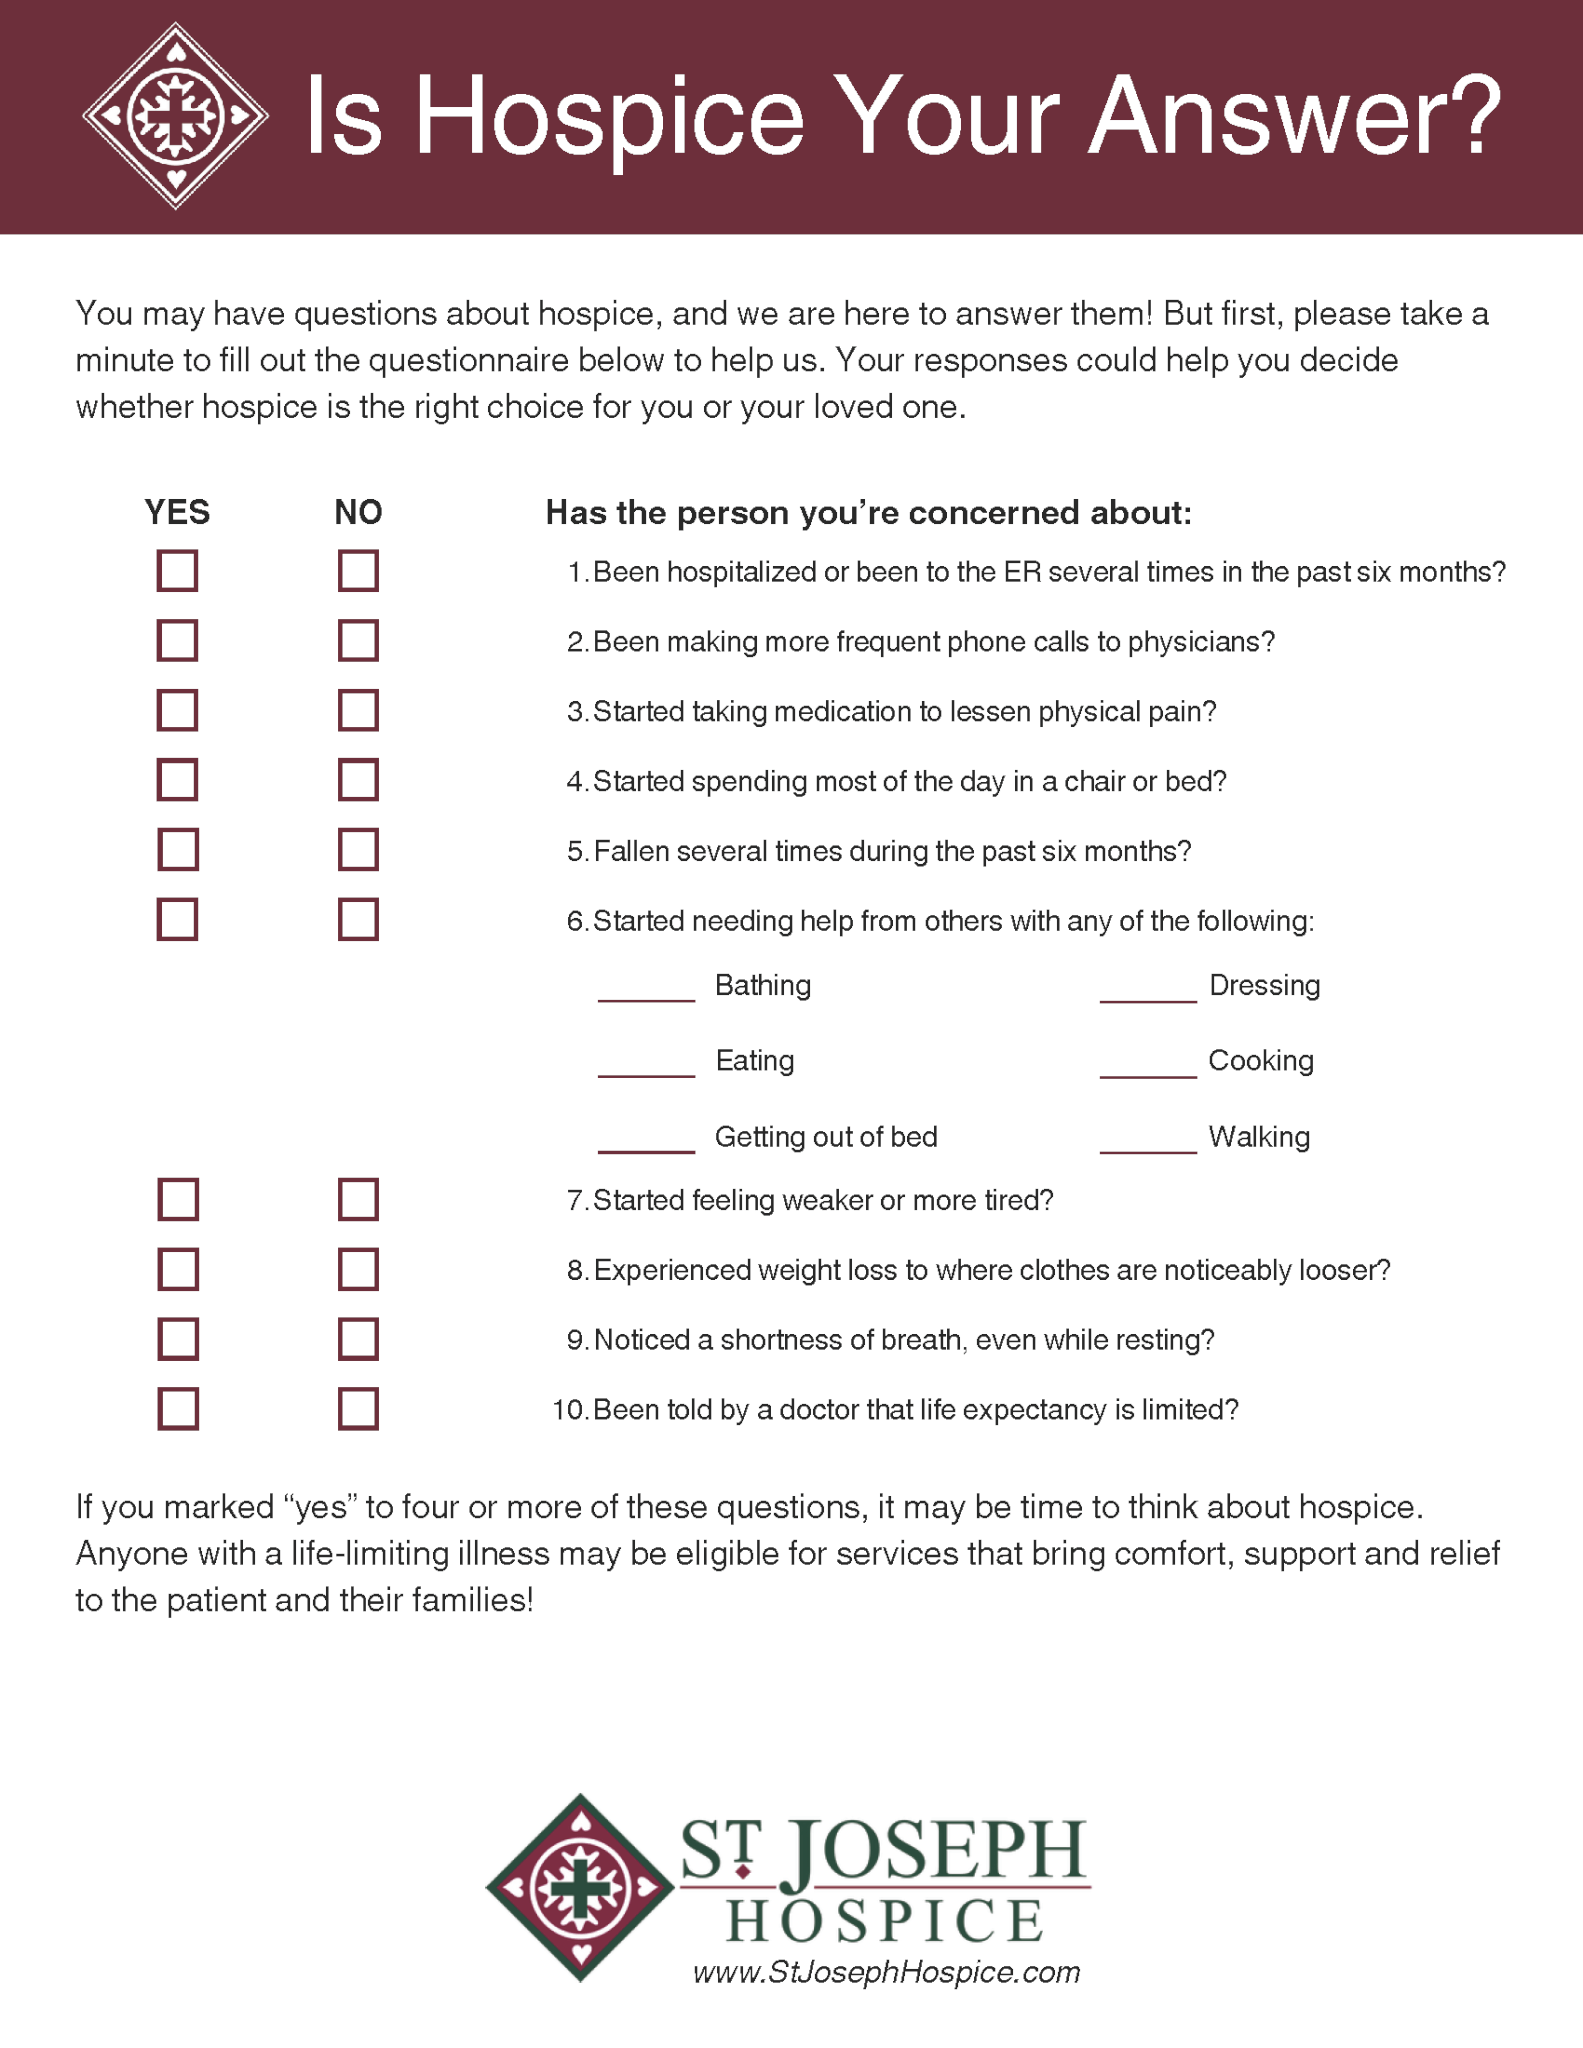 Is Hospice Your Answer Checklist v2